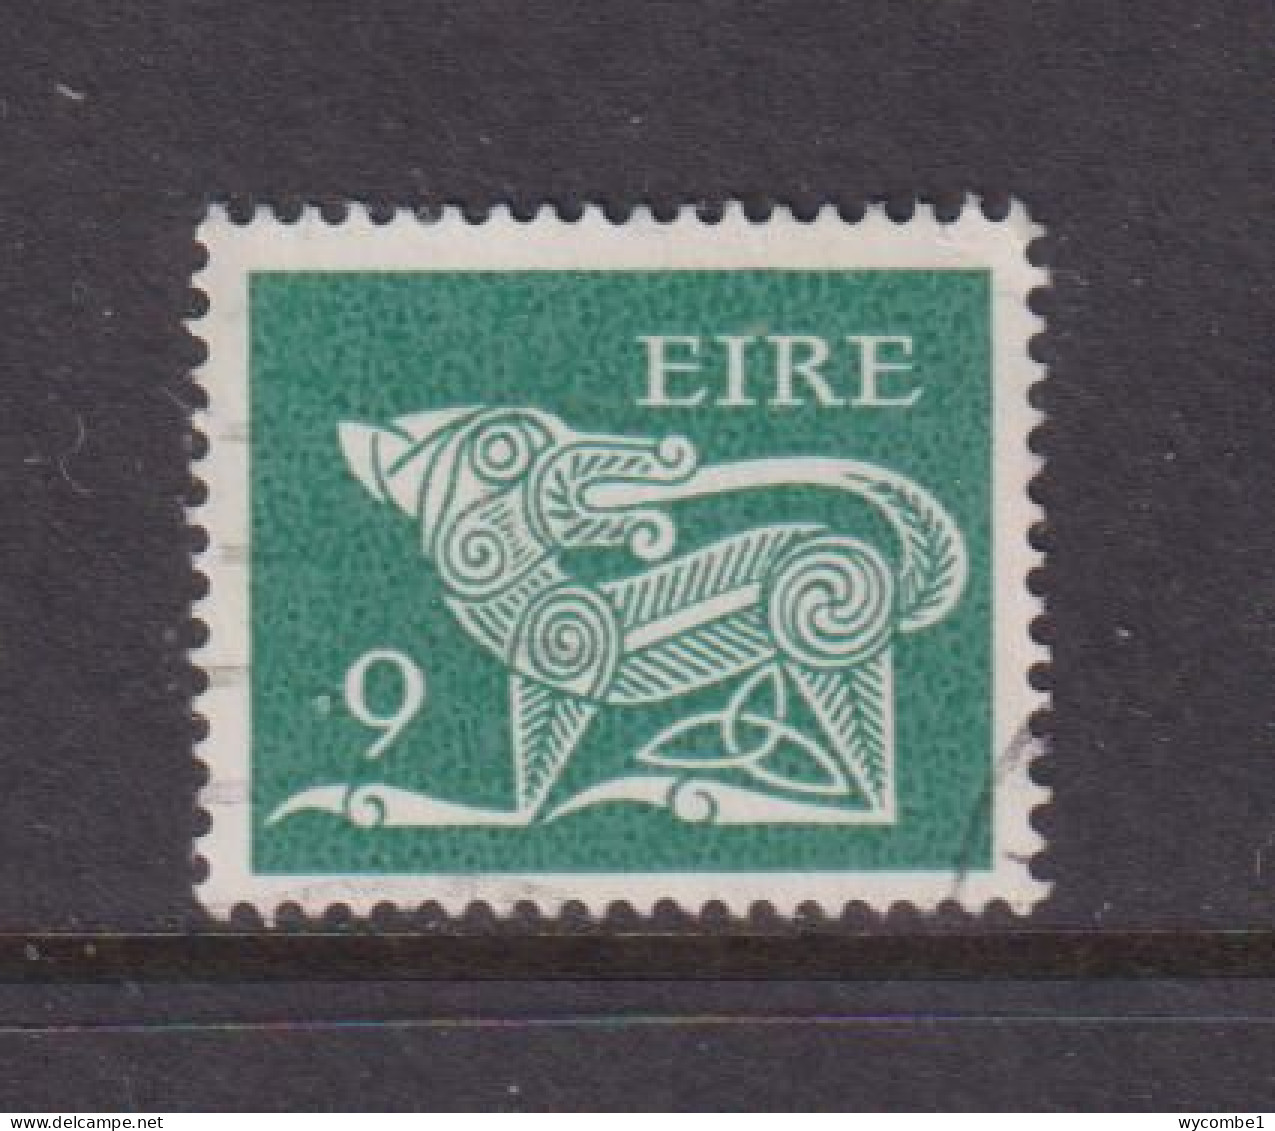 IRELAND - 1971  Decimal Currency Definitives  9p  Used As Scan - Gebraucht